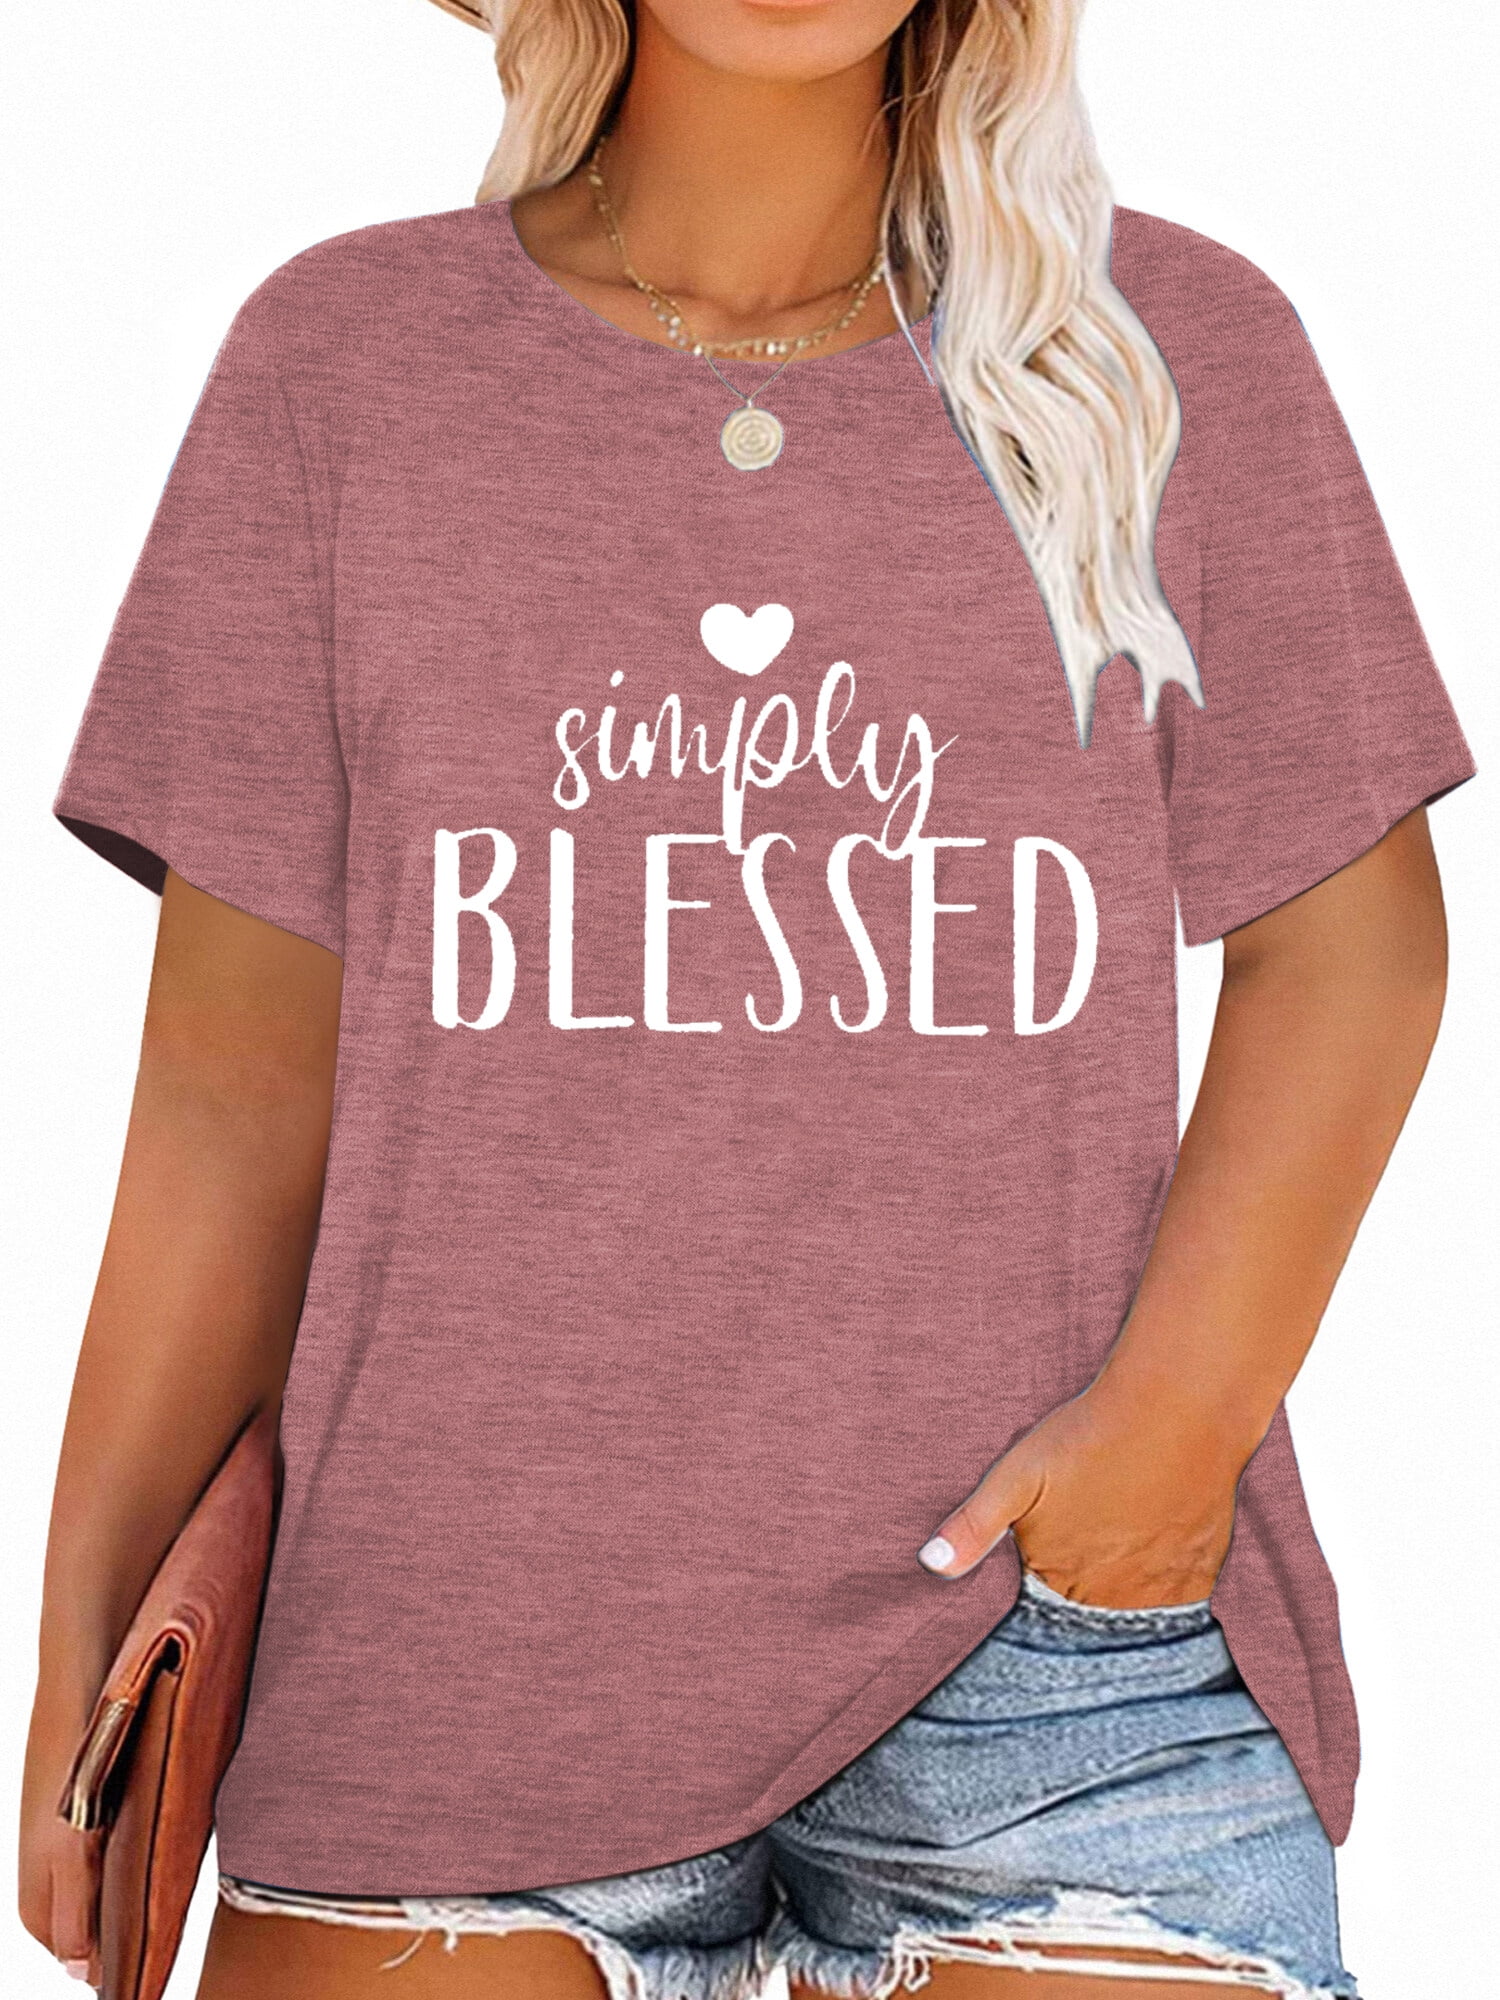 Anbech Faith Shirts for Women Plus Size Graphic Tees Oversized Athletic ...